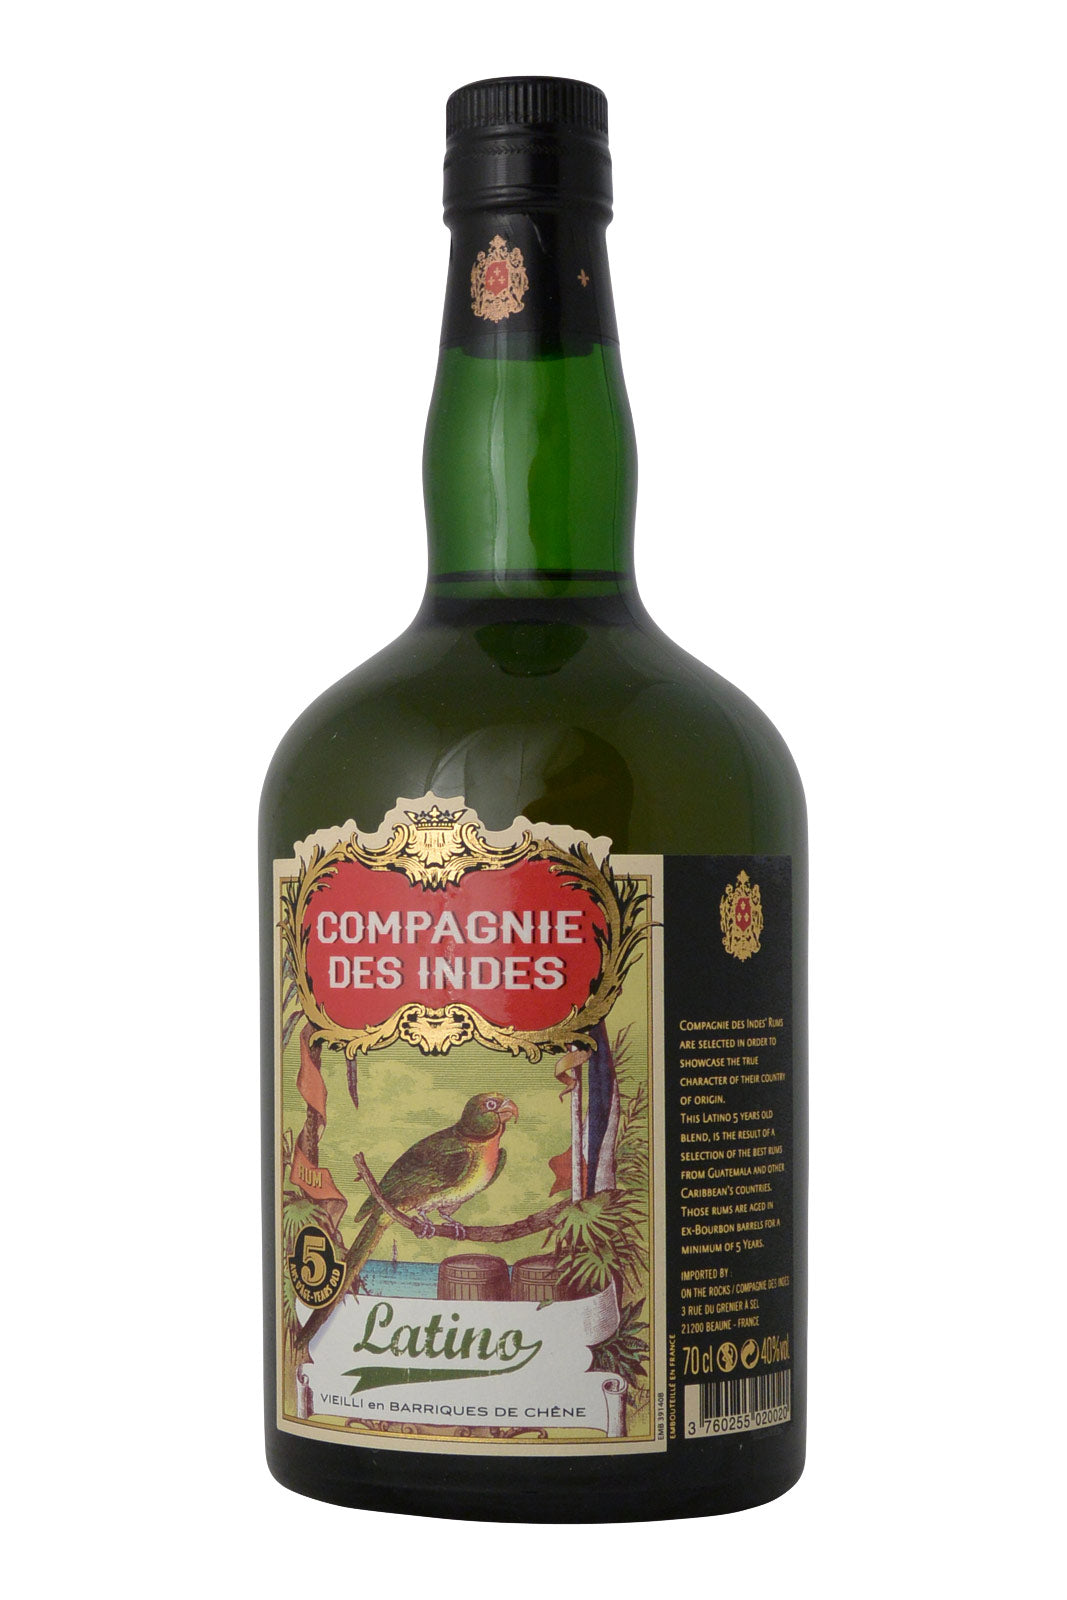 Compagnie des Indes Blend Latino 5 Old Year